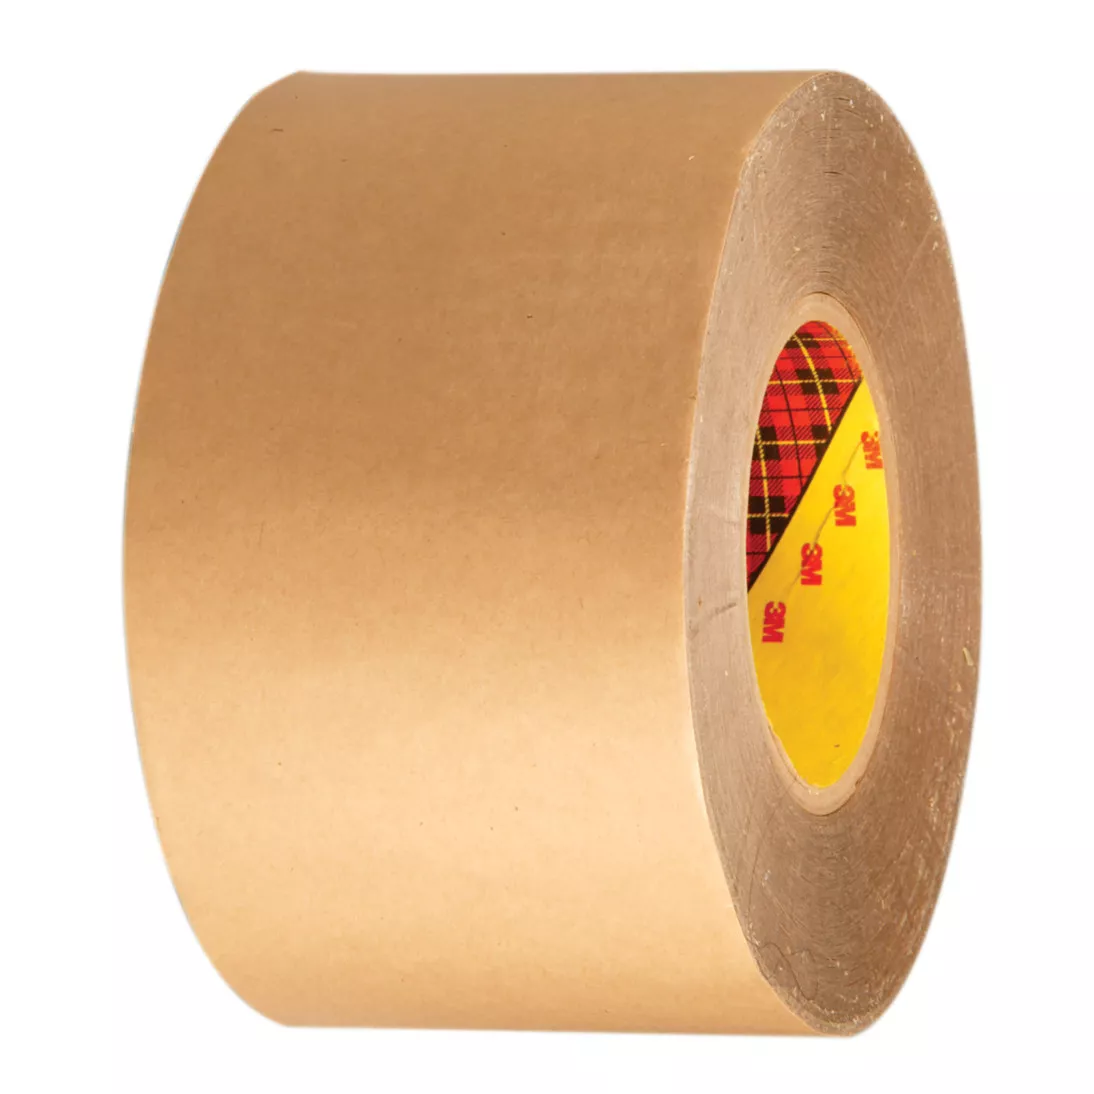 3M™ Removable Repositionable Double Coated Tape 9425HT, Clear, 48 in x
180 yd, 5.4 mil, 1 roll per case